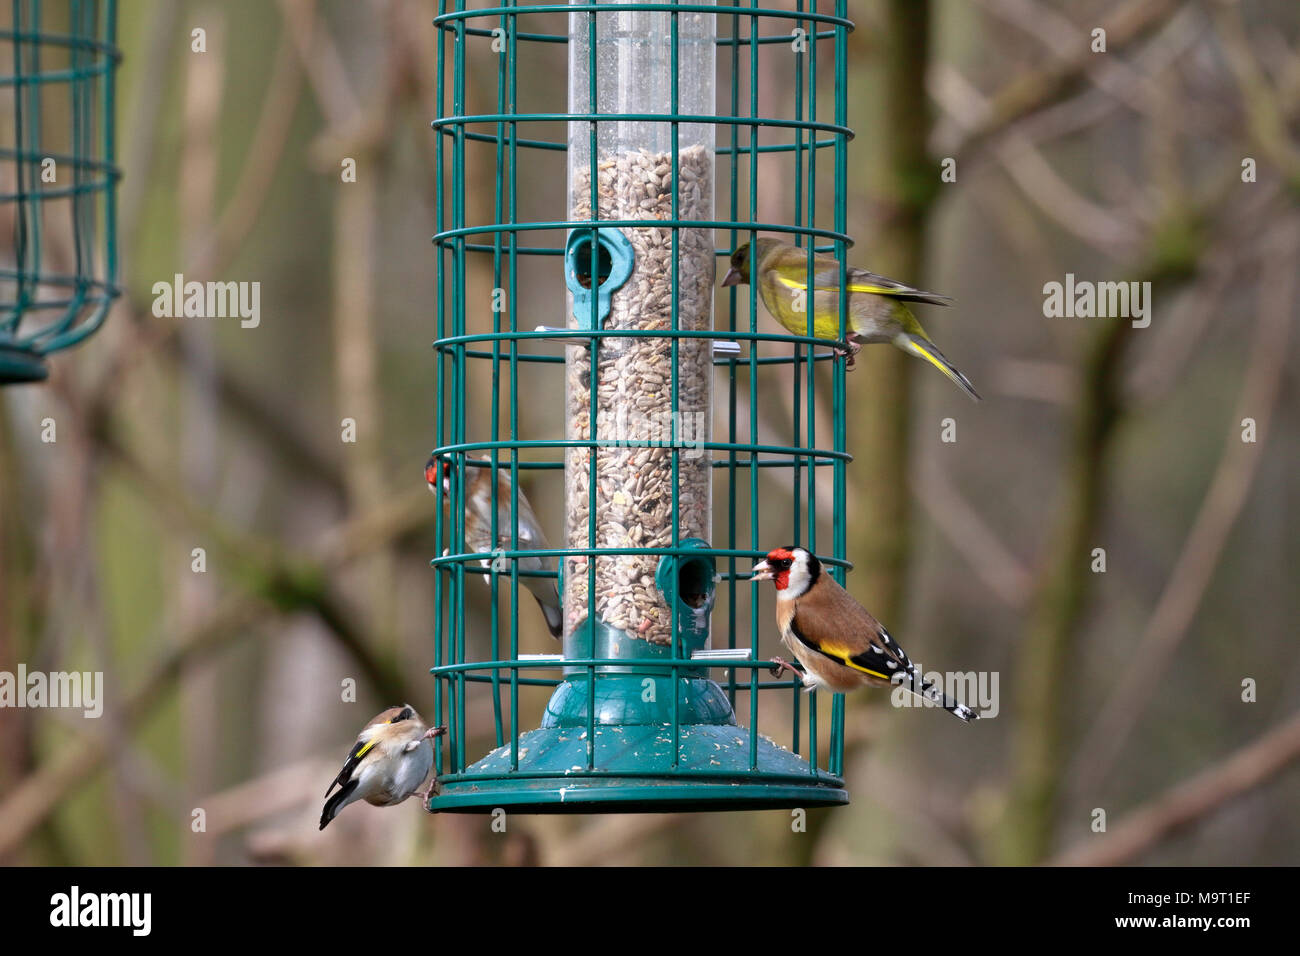 Goldfinches, Carduelis carduelis and a Greenfinch, Carduelis chloris feeding at a bird feeder, England, UK. Stock Photo